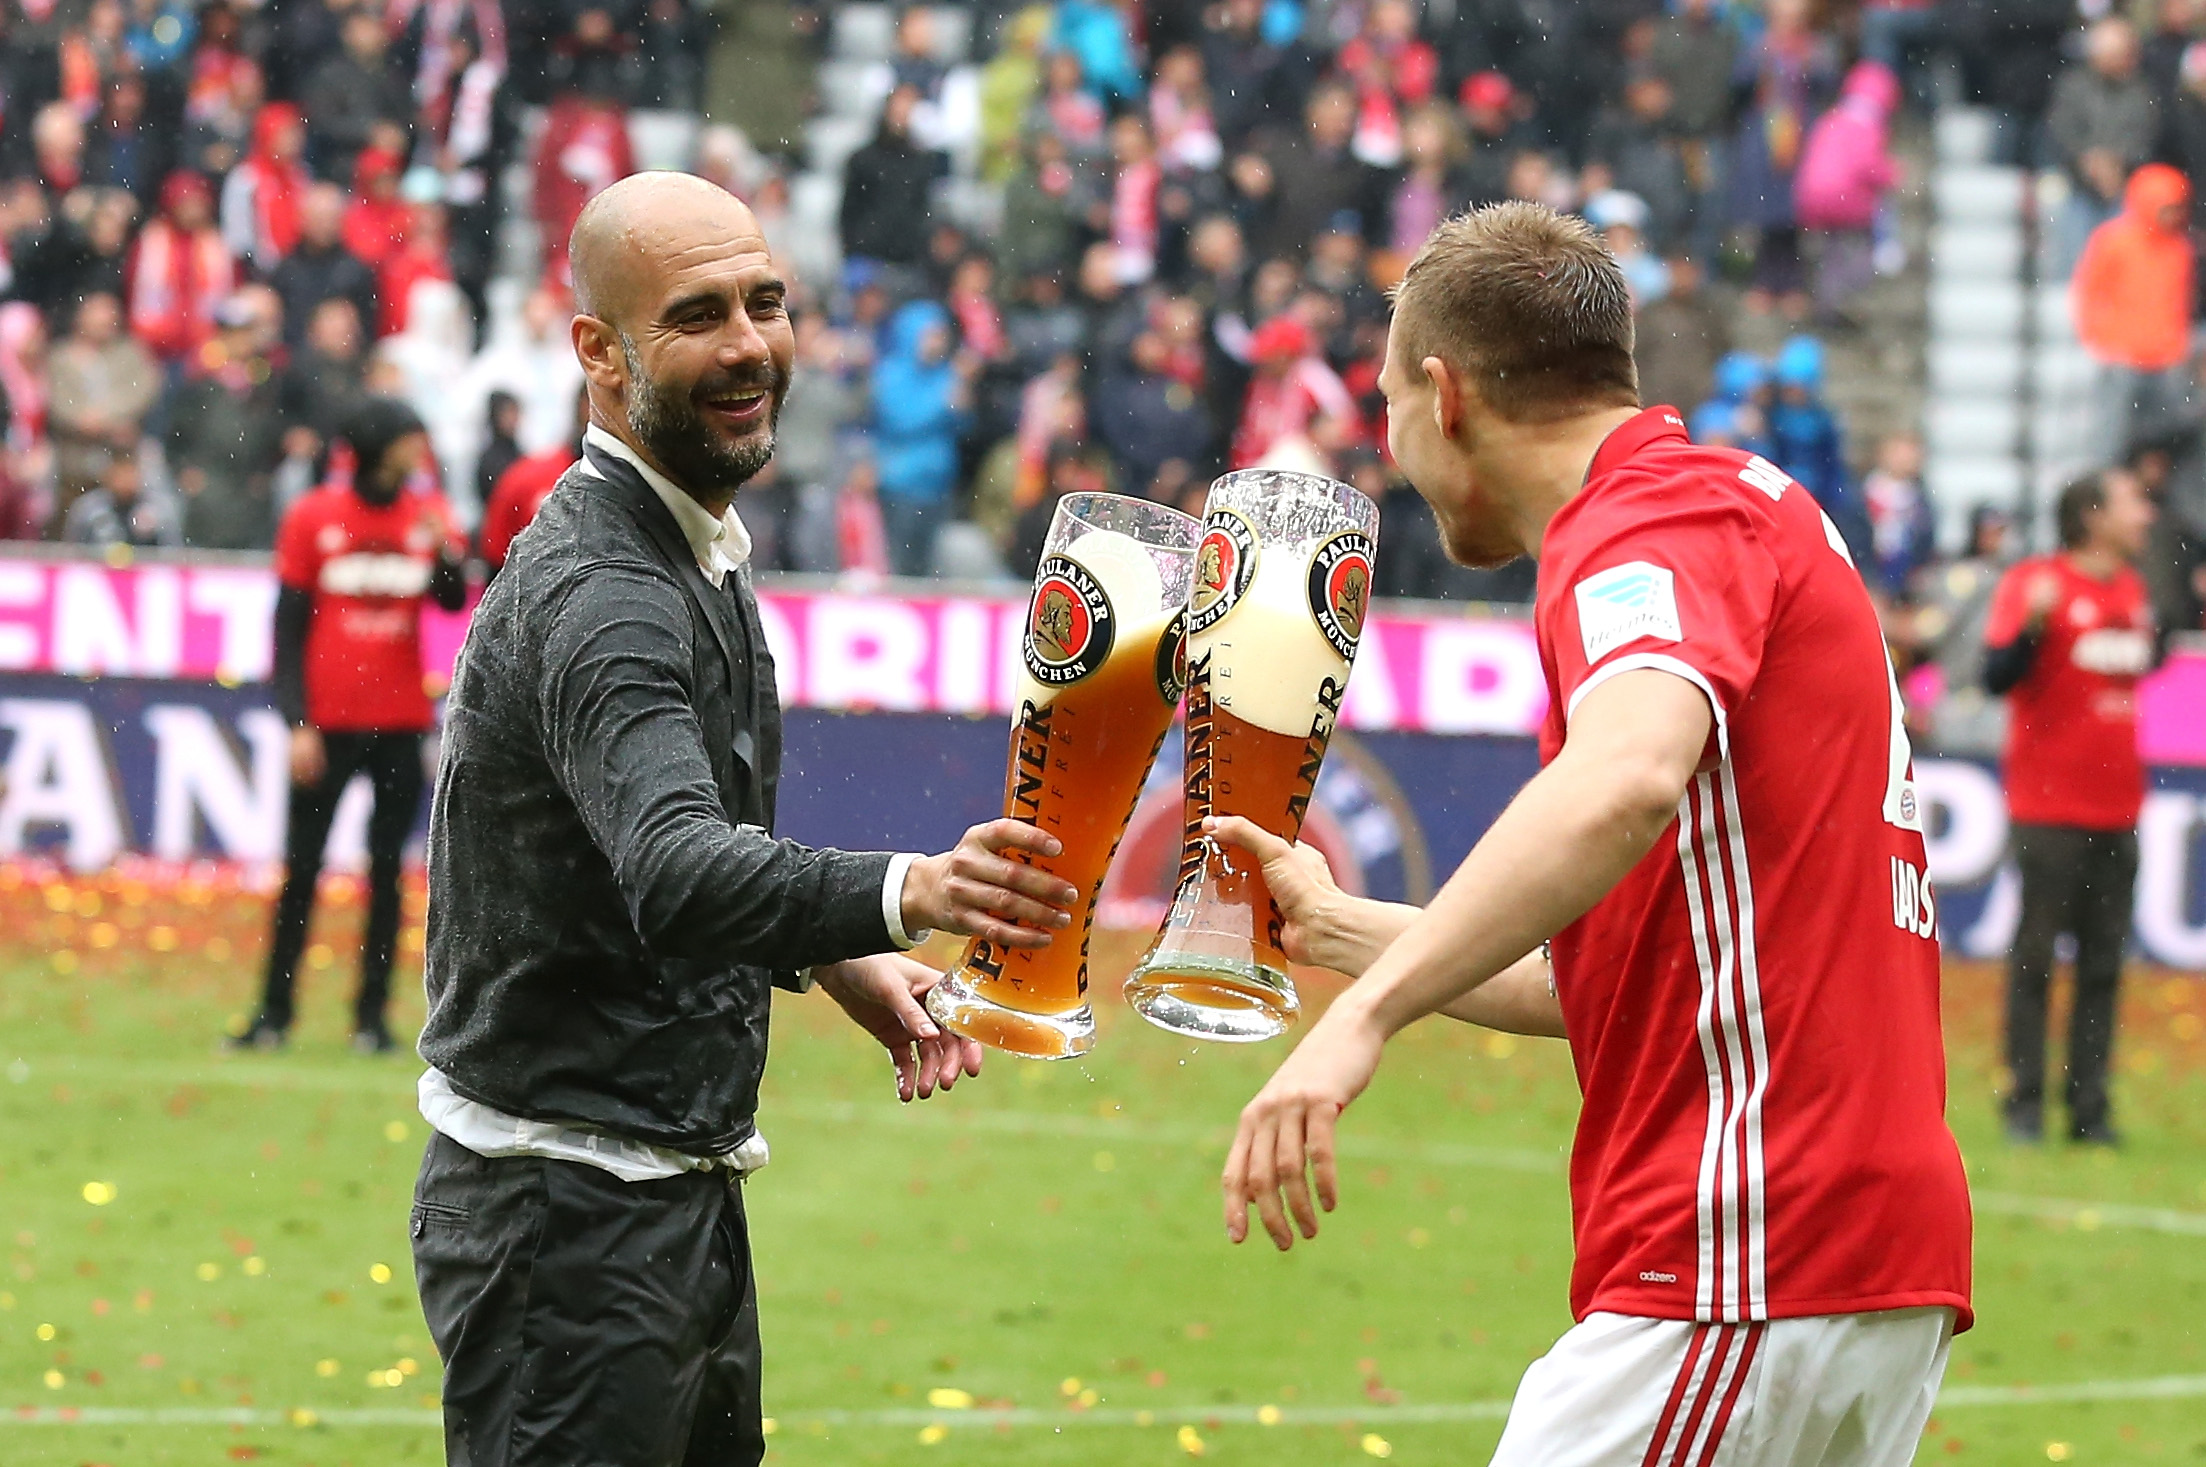 MUNICH, GERMANY - MAY 14: Josep Guardiola, head coach of Bayern Muenchen and Holger Badstuber of Bayern Muenchen celebrate with beer during the Bundesliga match between FC Bayern Muenchen and Hannover 96 at Allianz Arena on May 14, 2016 in Munich, Germany.  (Photo by Lars Baron/Bongarts/Getty Images)